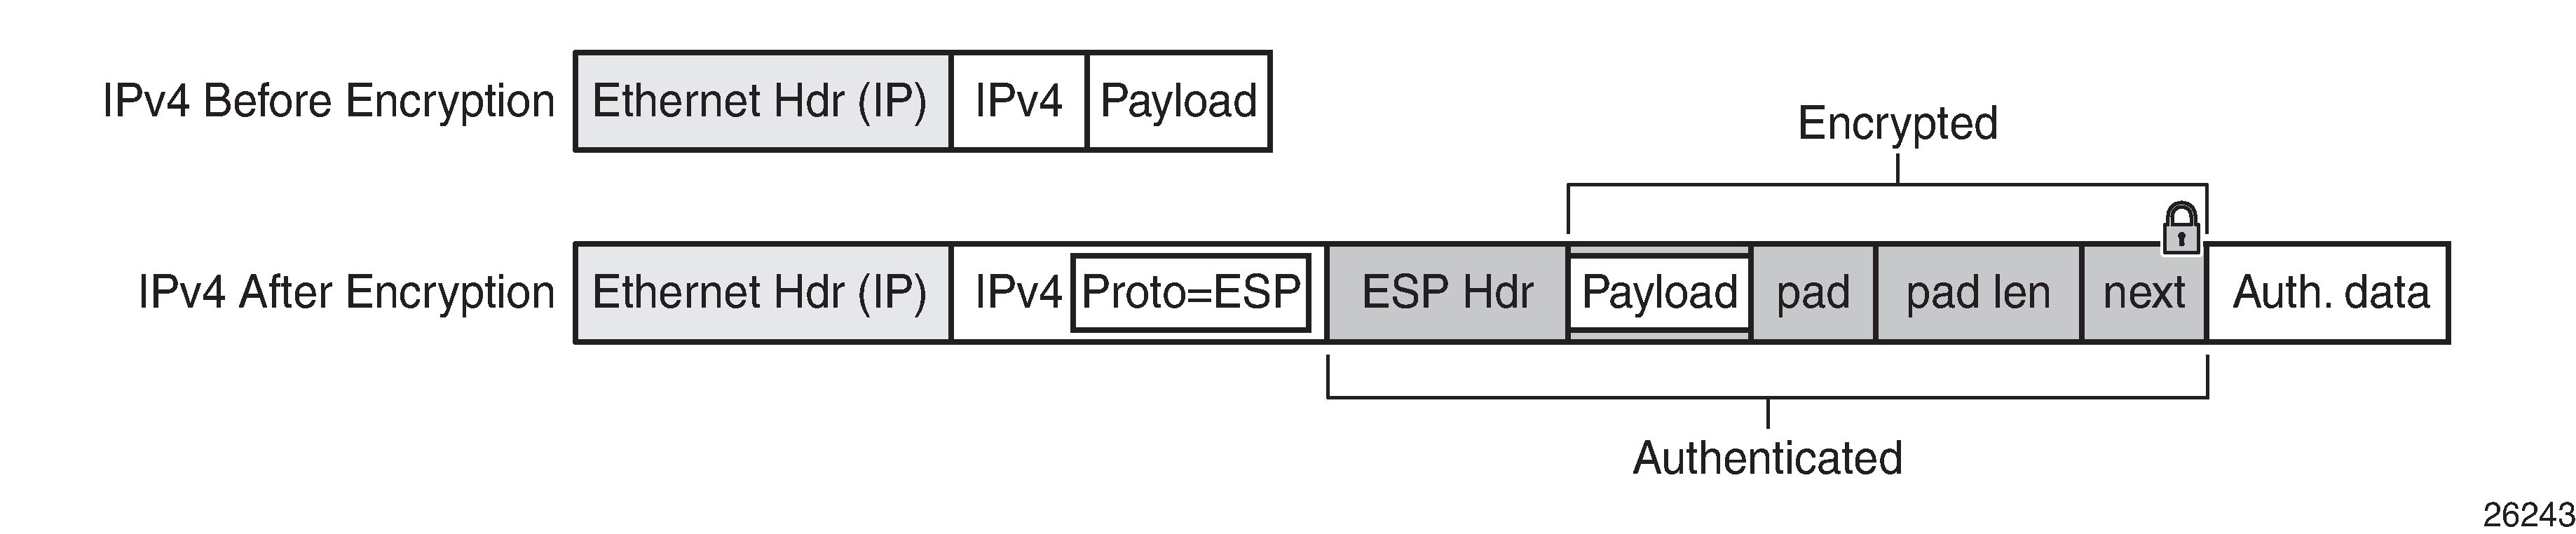 pessimist bison Hoved Router interface encryption with NGE